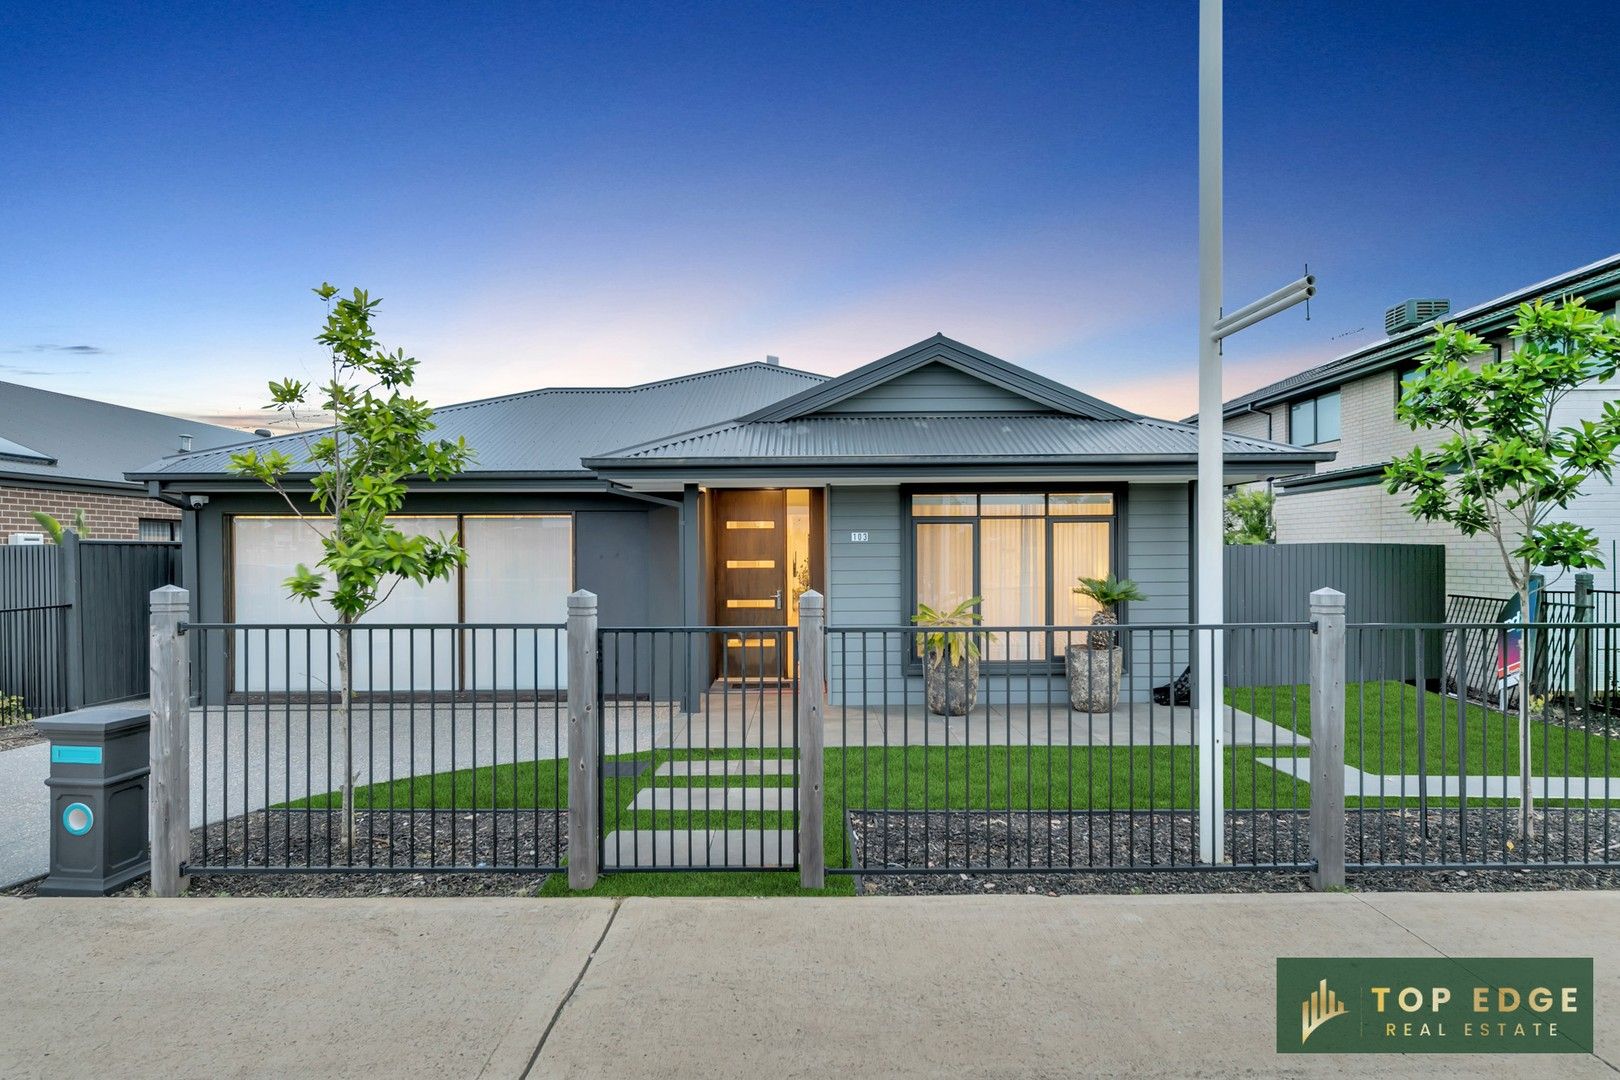 4 bedrooms House in 103 Beattys Road FRASER RISE VIC, 3336